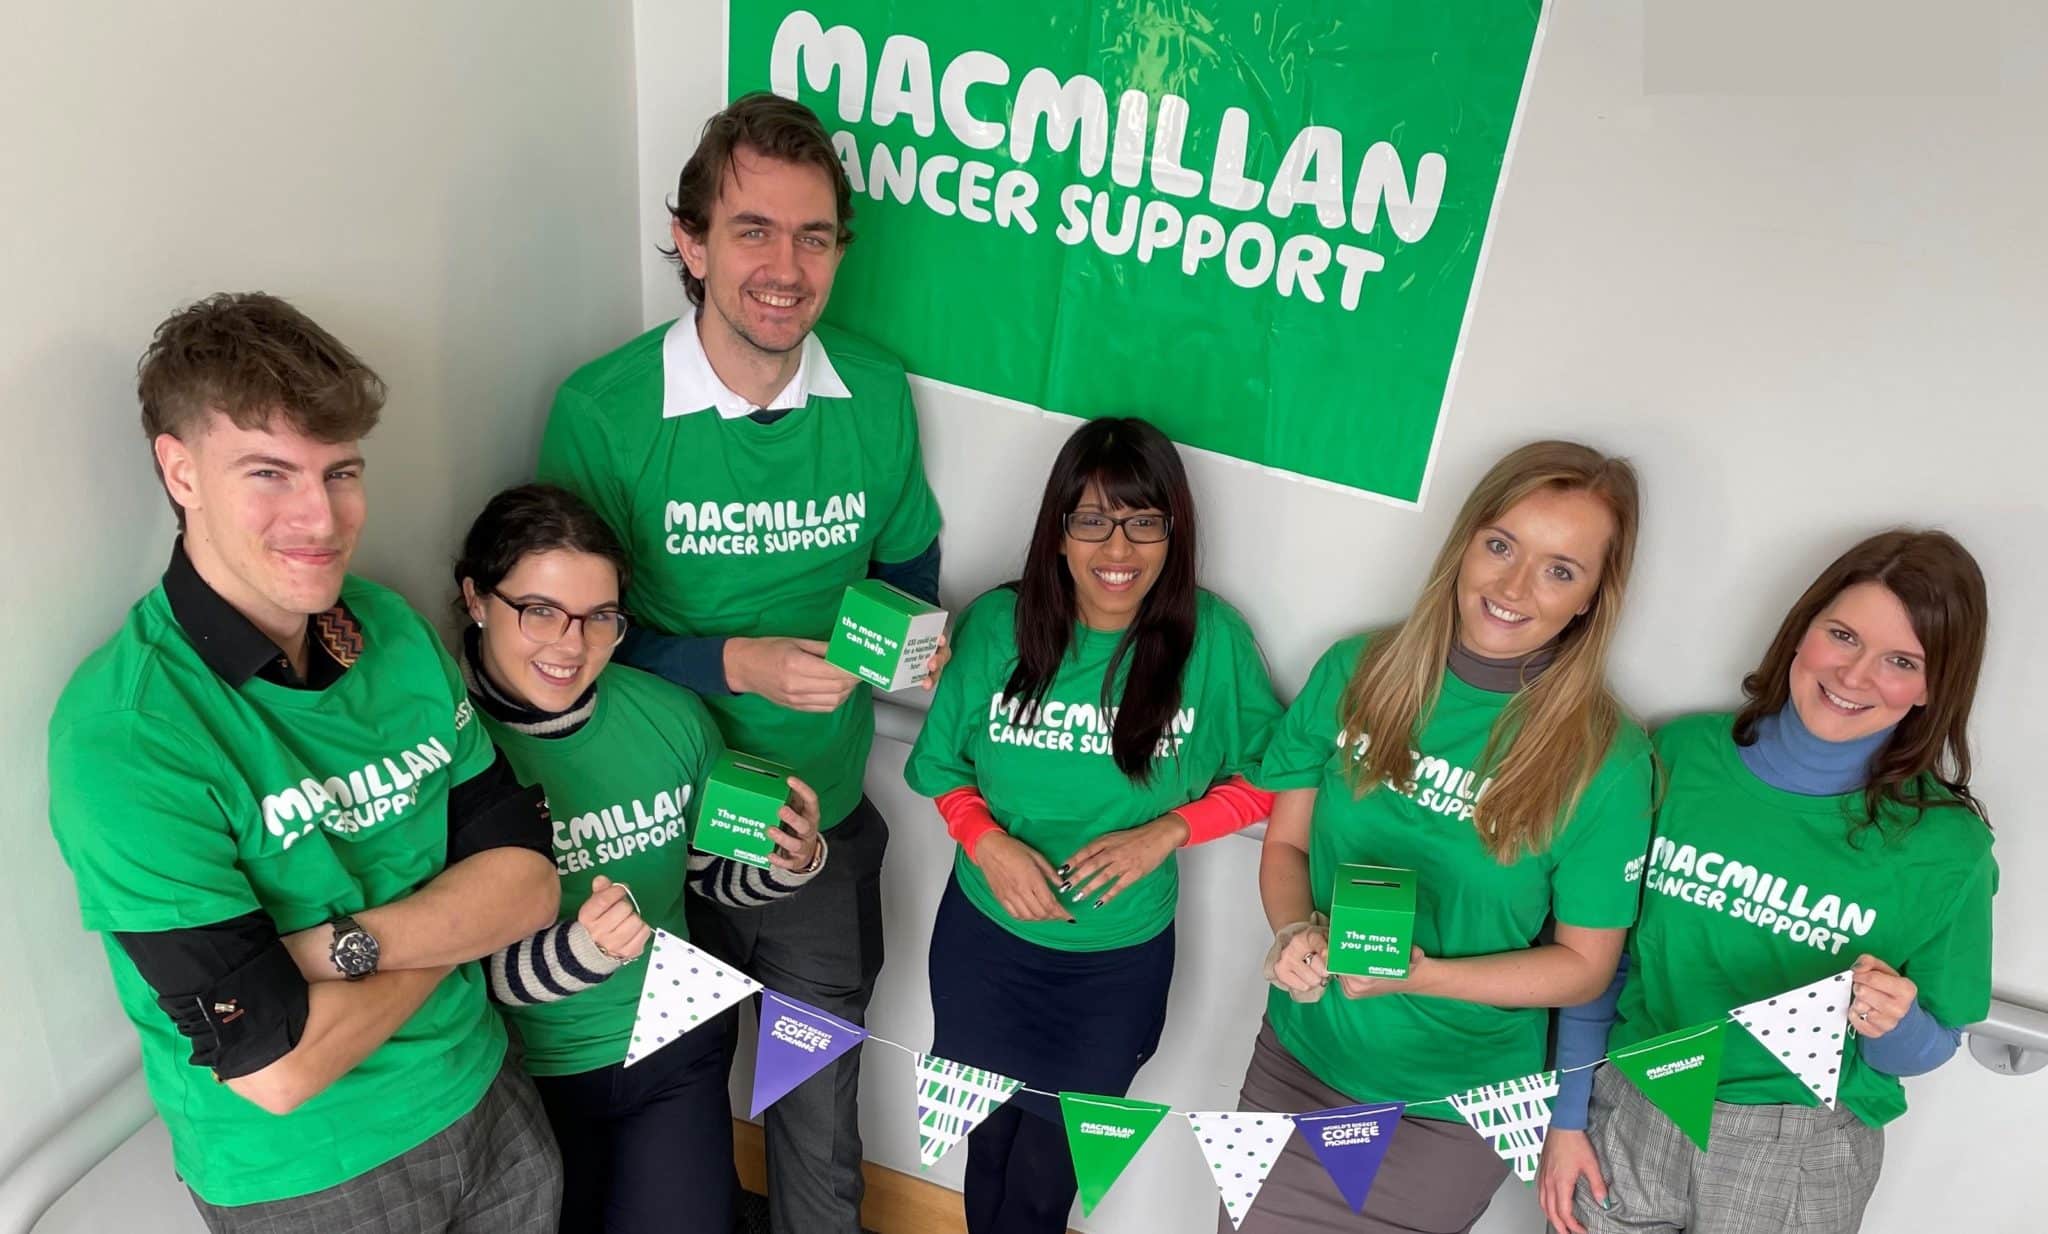 Parsons employees pose wearing green Macmillan Cancer Support t-shirts